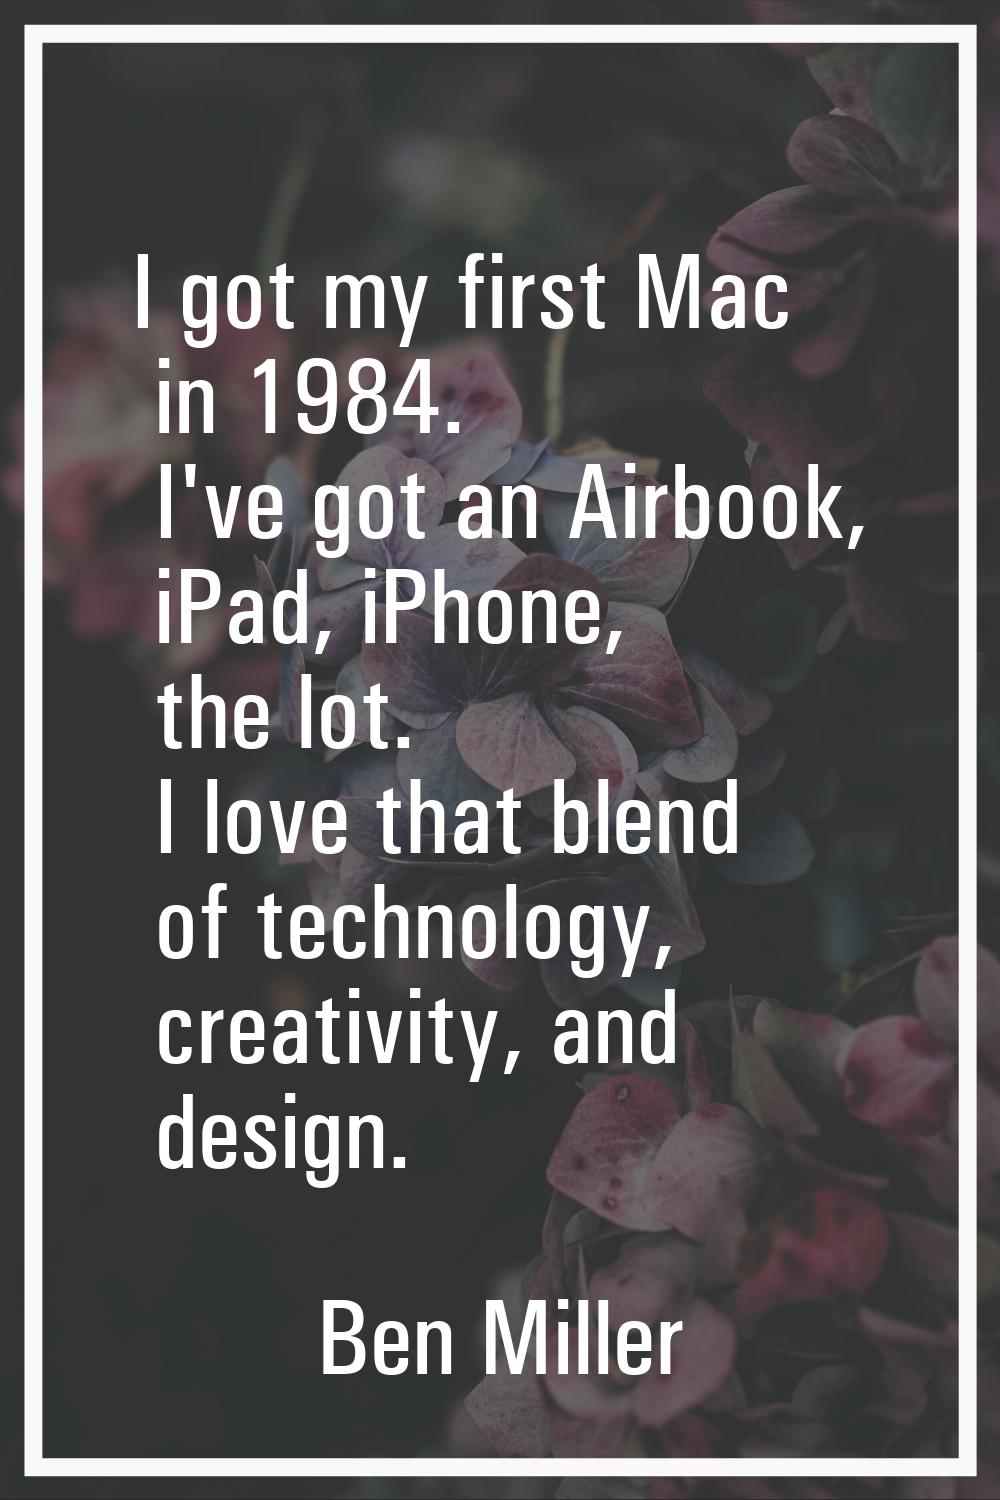 I got my first Mac in 1984. I've got an Airbook, iPad, iPhone, the lot. I love that blend of techno